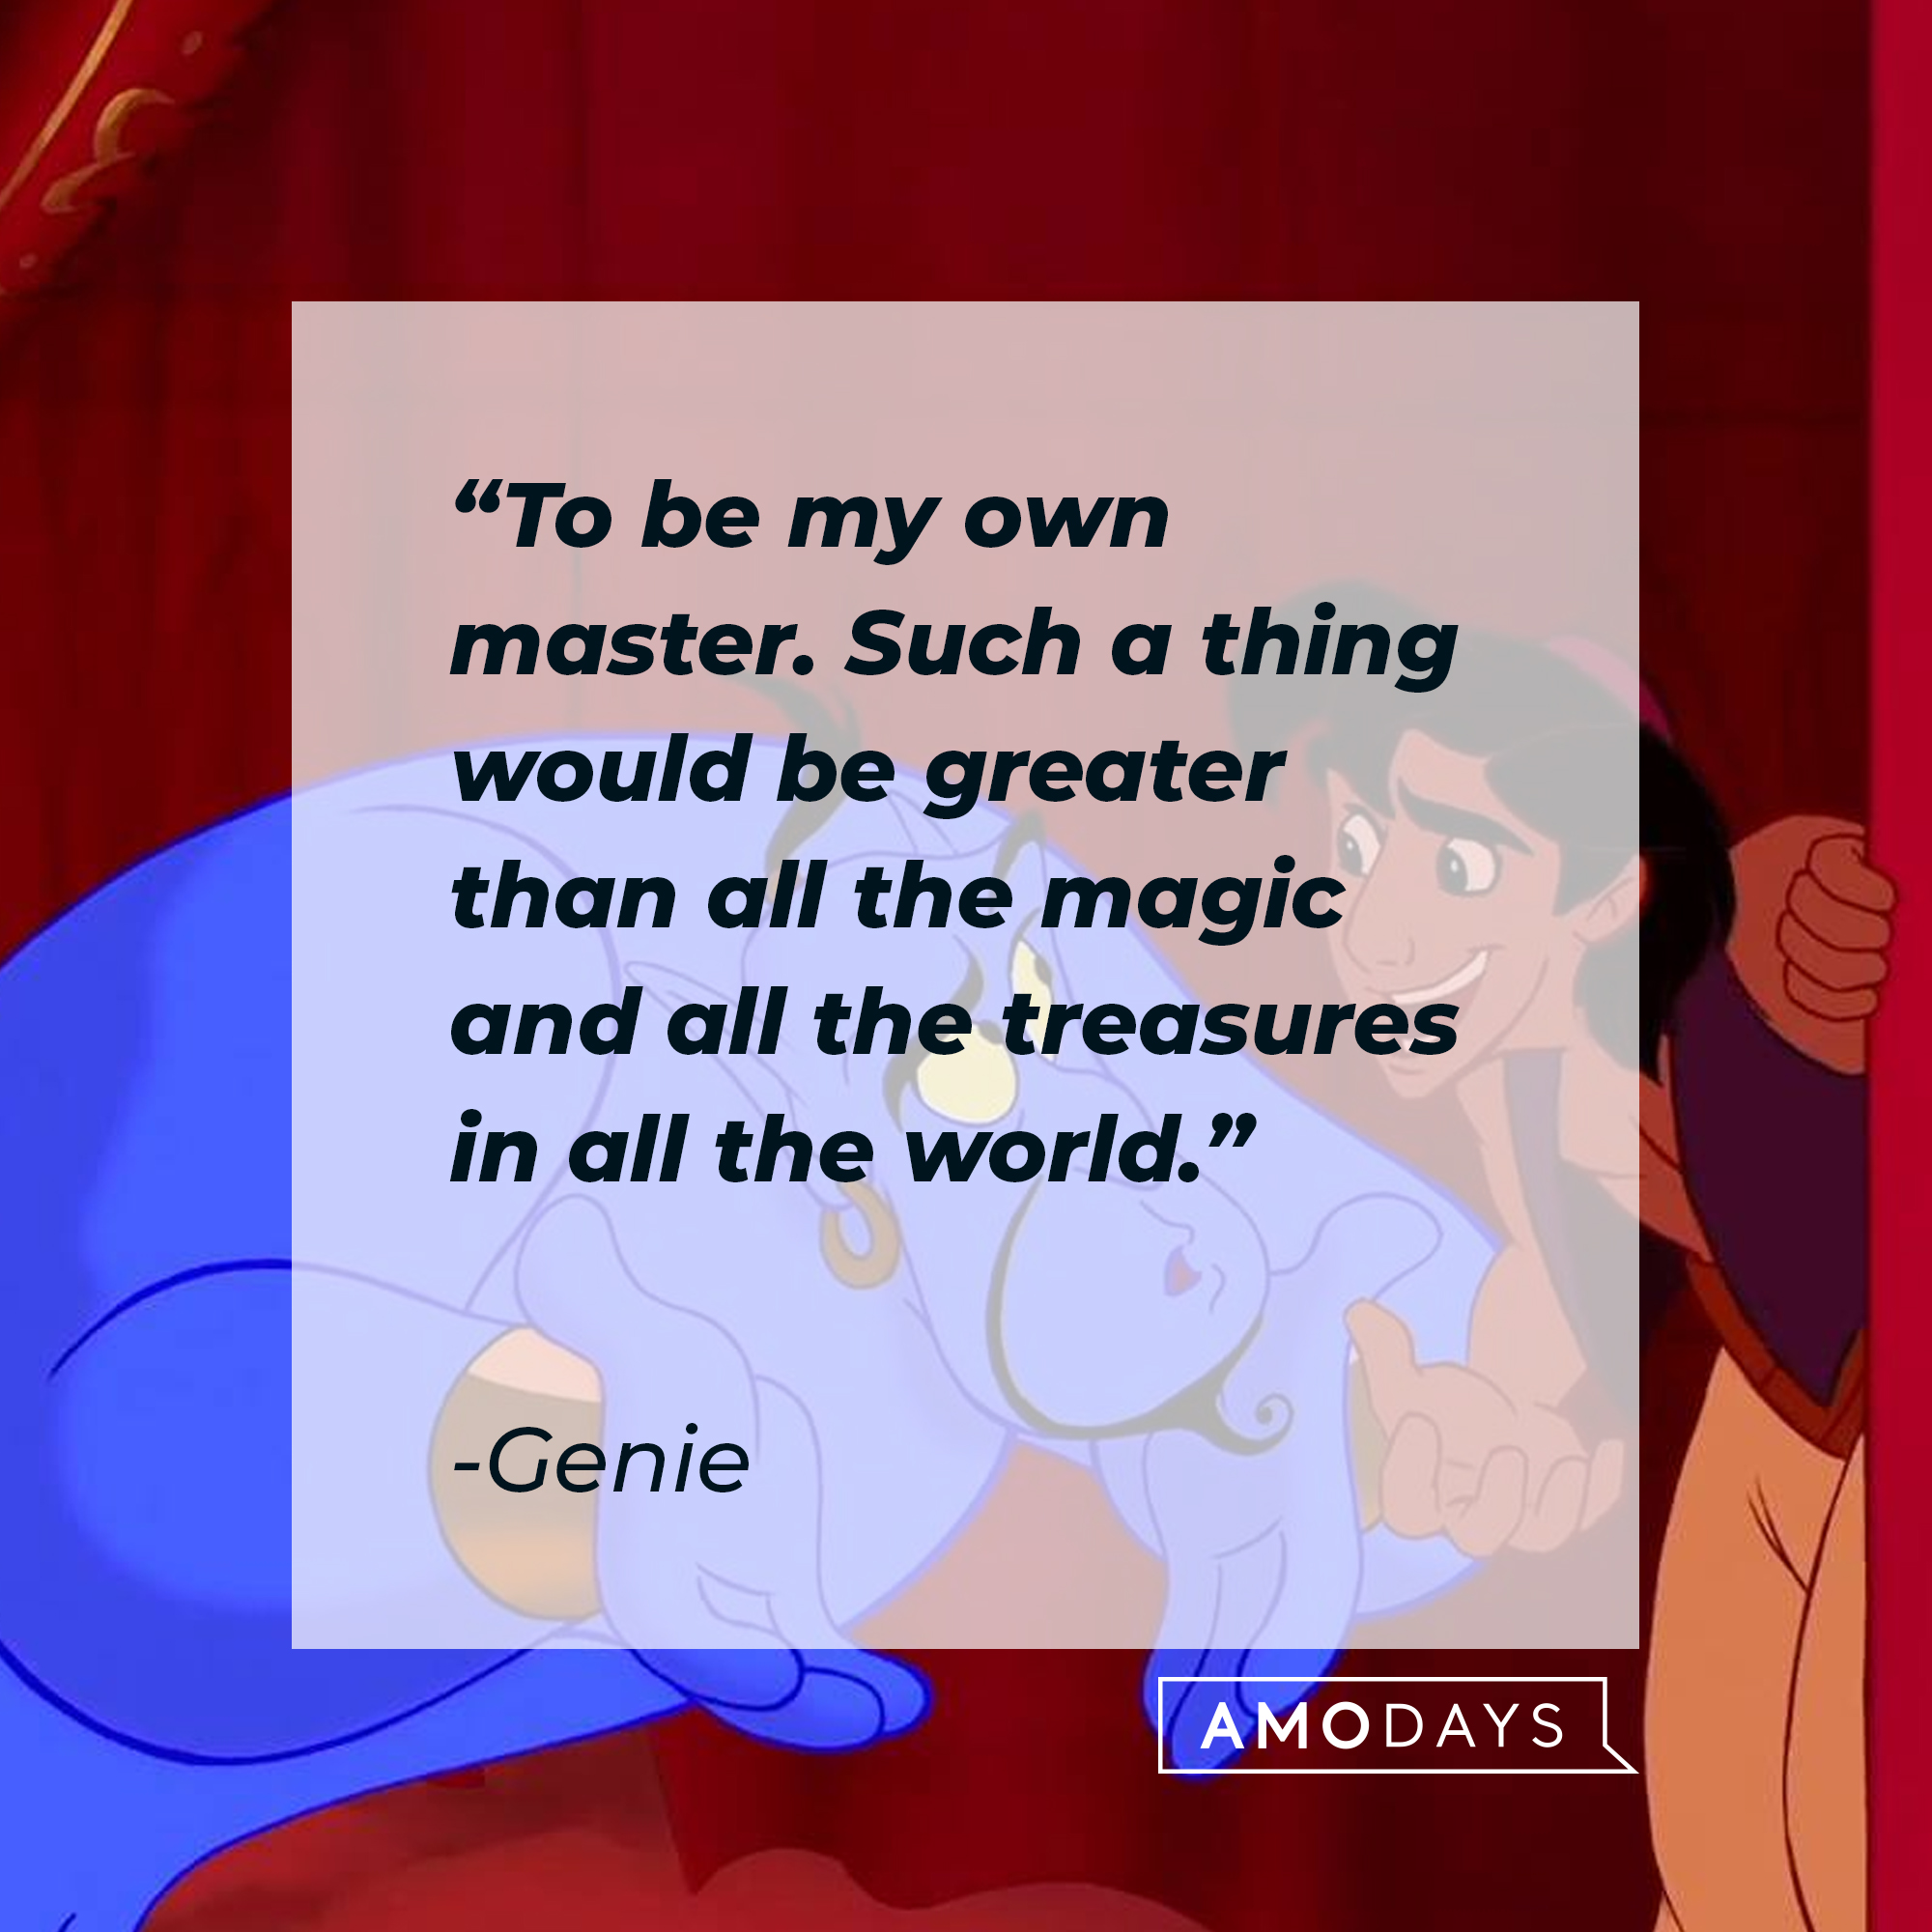 The animated Genie with his quote: “To be my own master. Such a thing would be greater than all the magic and all the treasures in all the world.” | Source: Facebook.com/DisneyAladdin